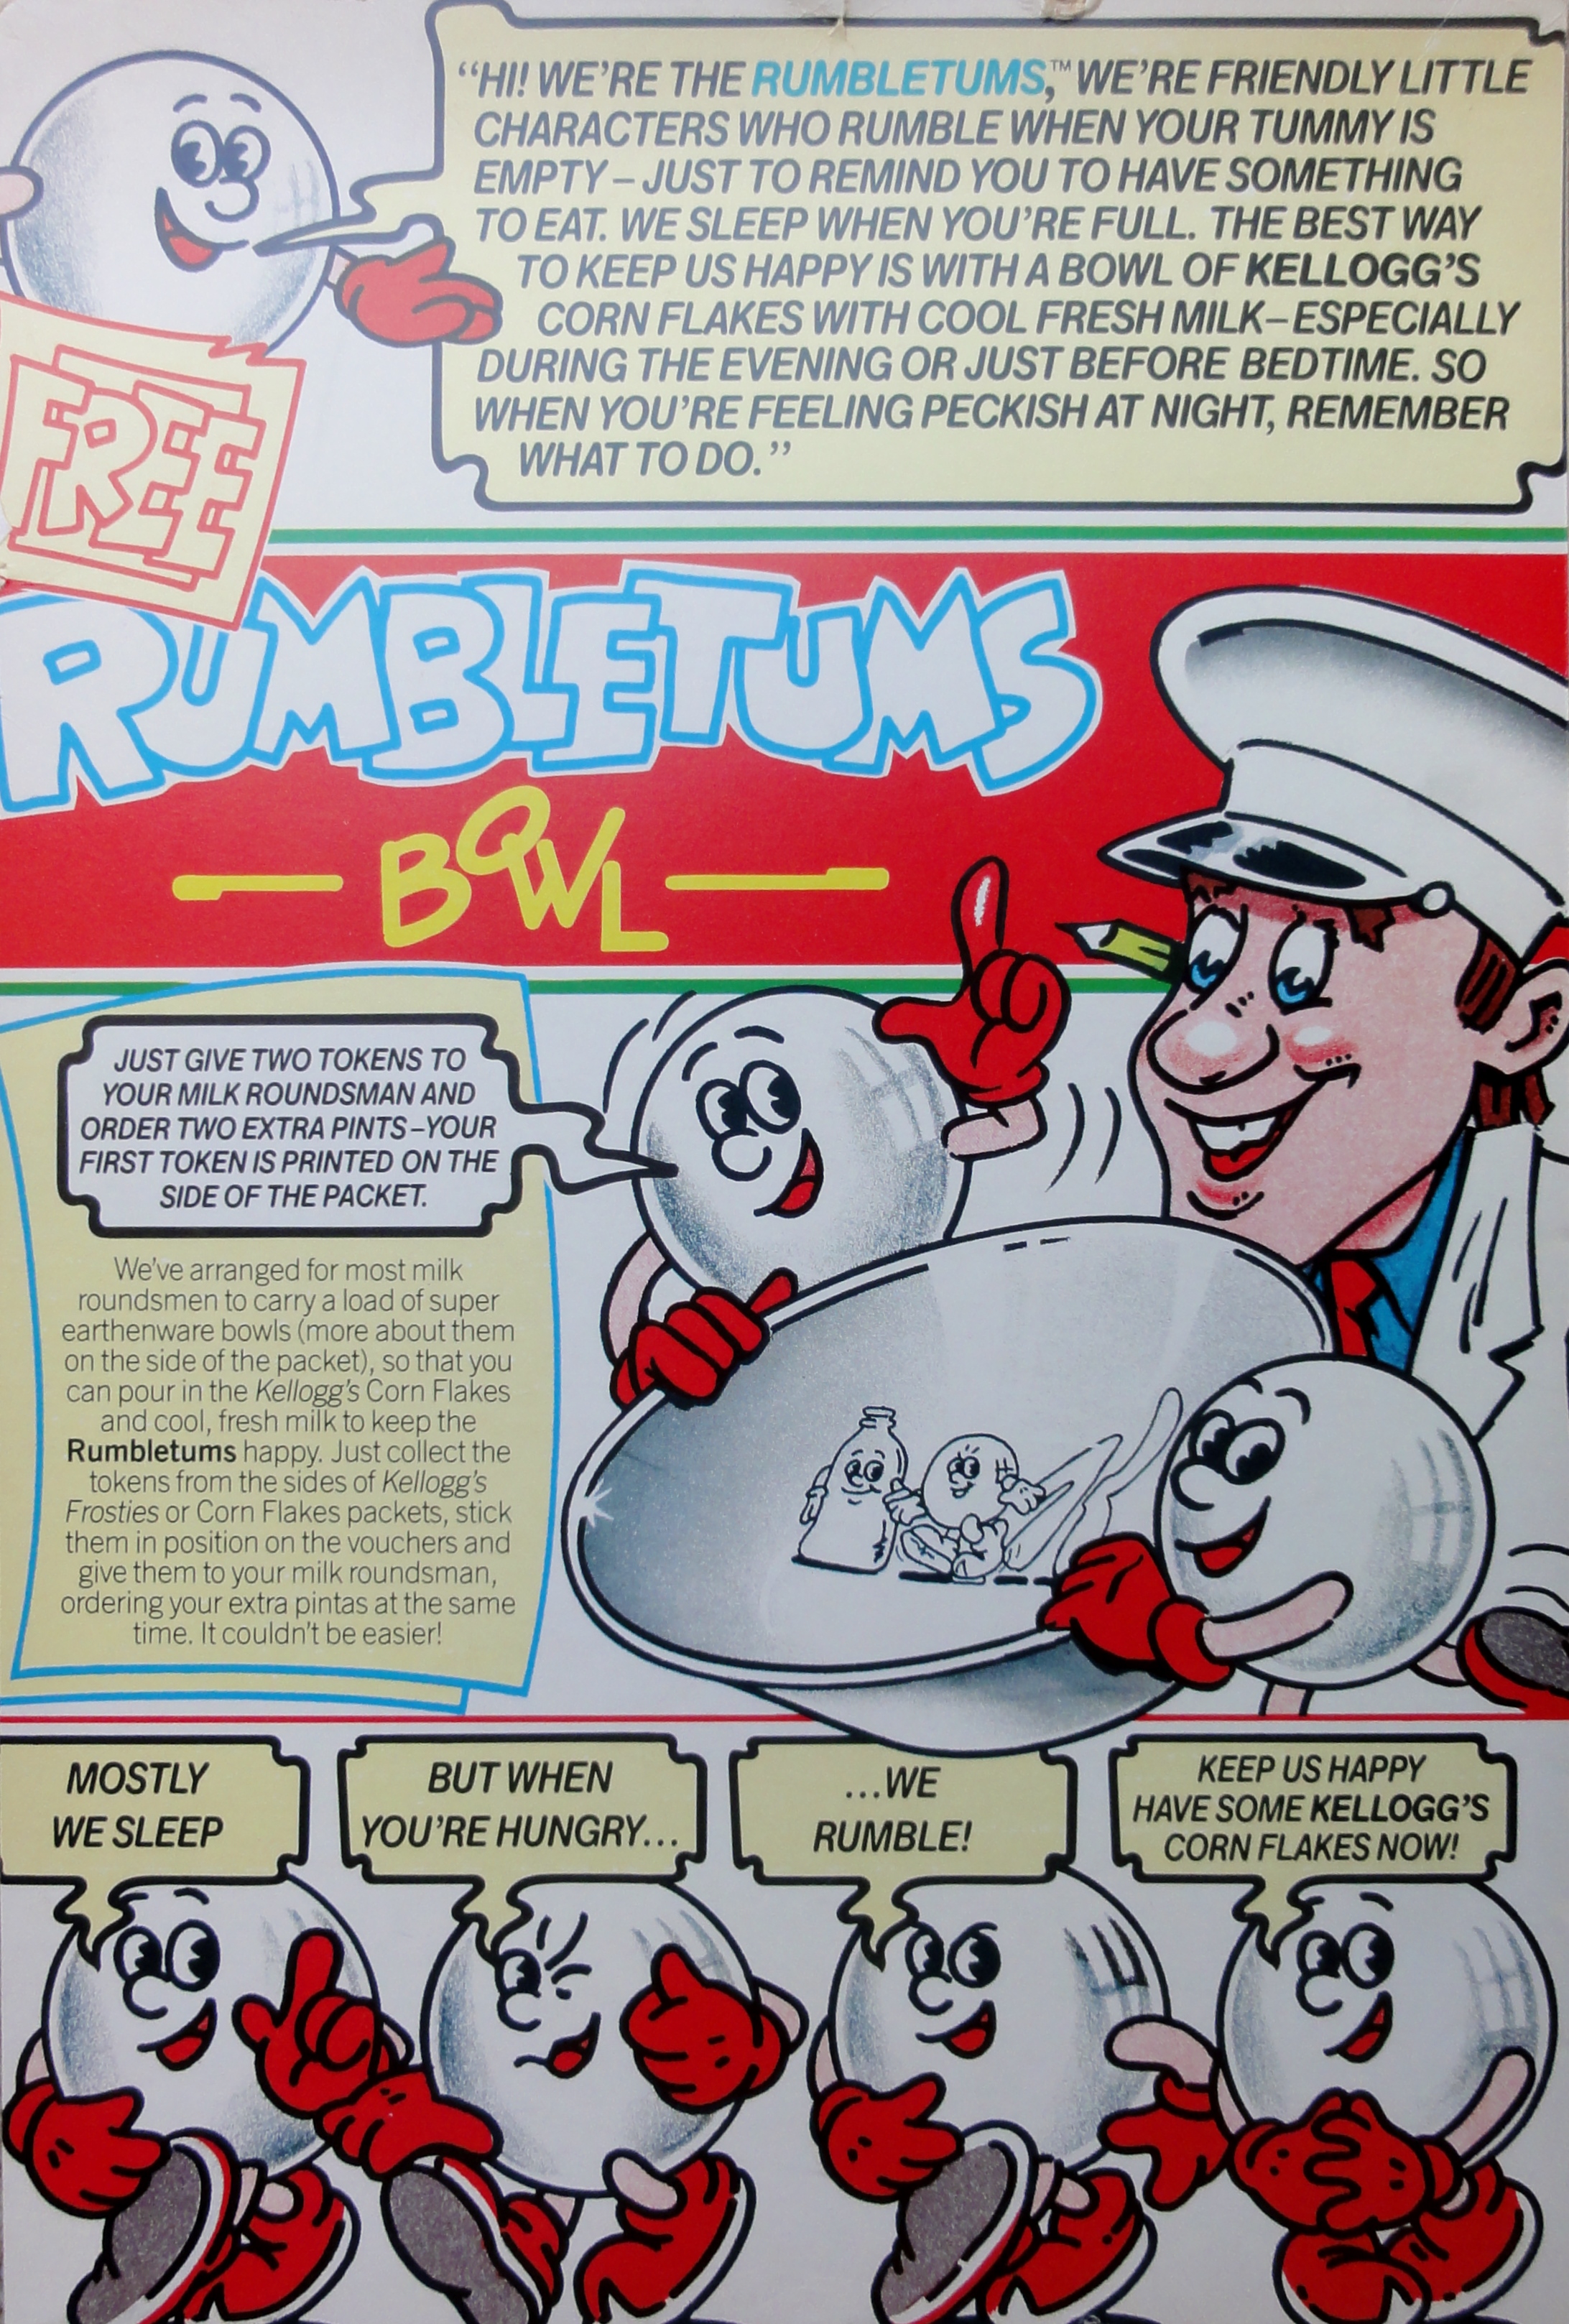 1984 Cornflakes Rumbletums cereal bowl (2)